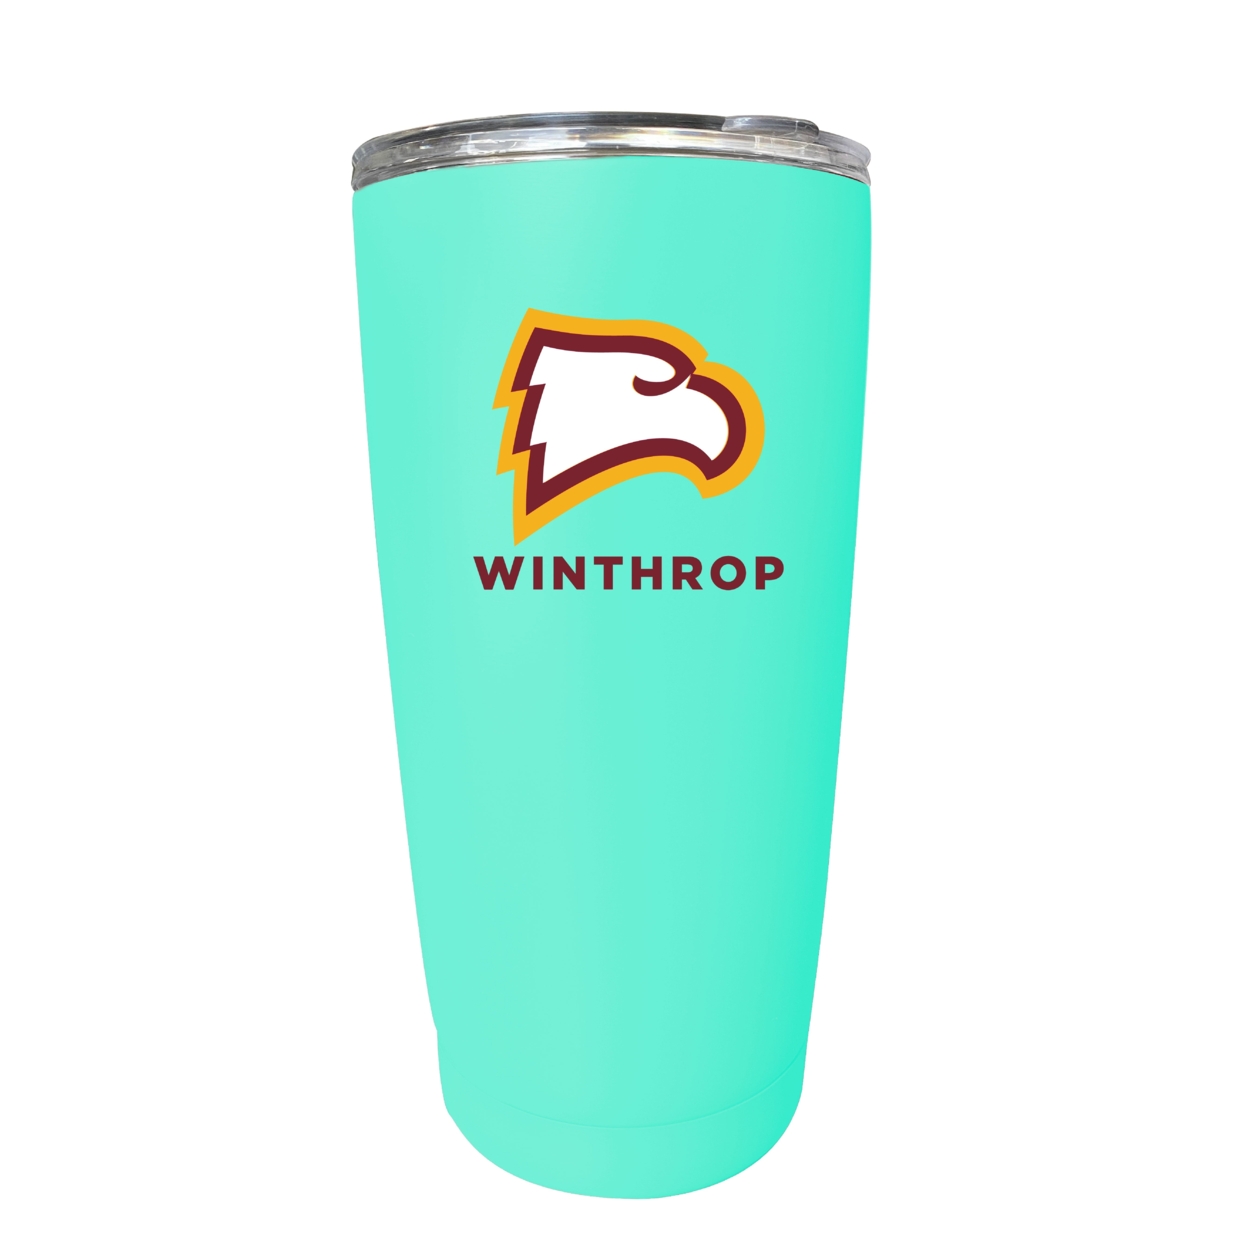 Winthrop University 16 Oz Insulated Stainless Steel Tumblers - Choose Your Color - Navy